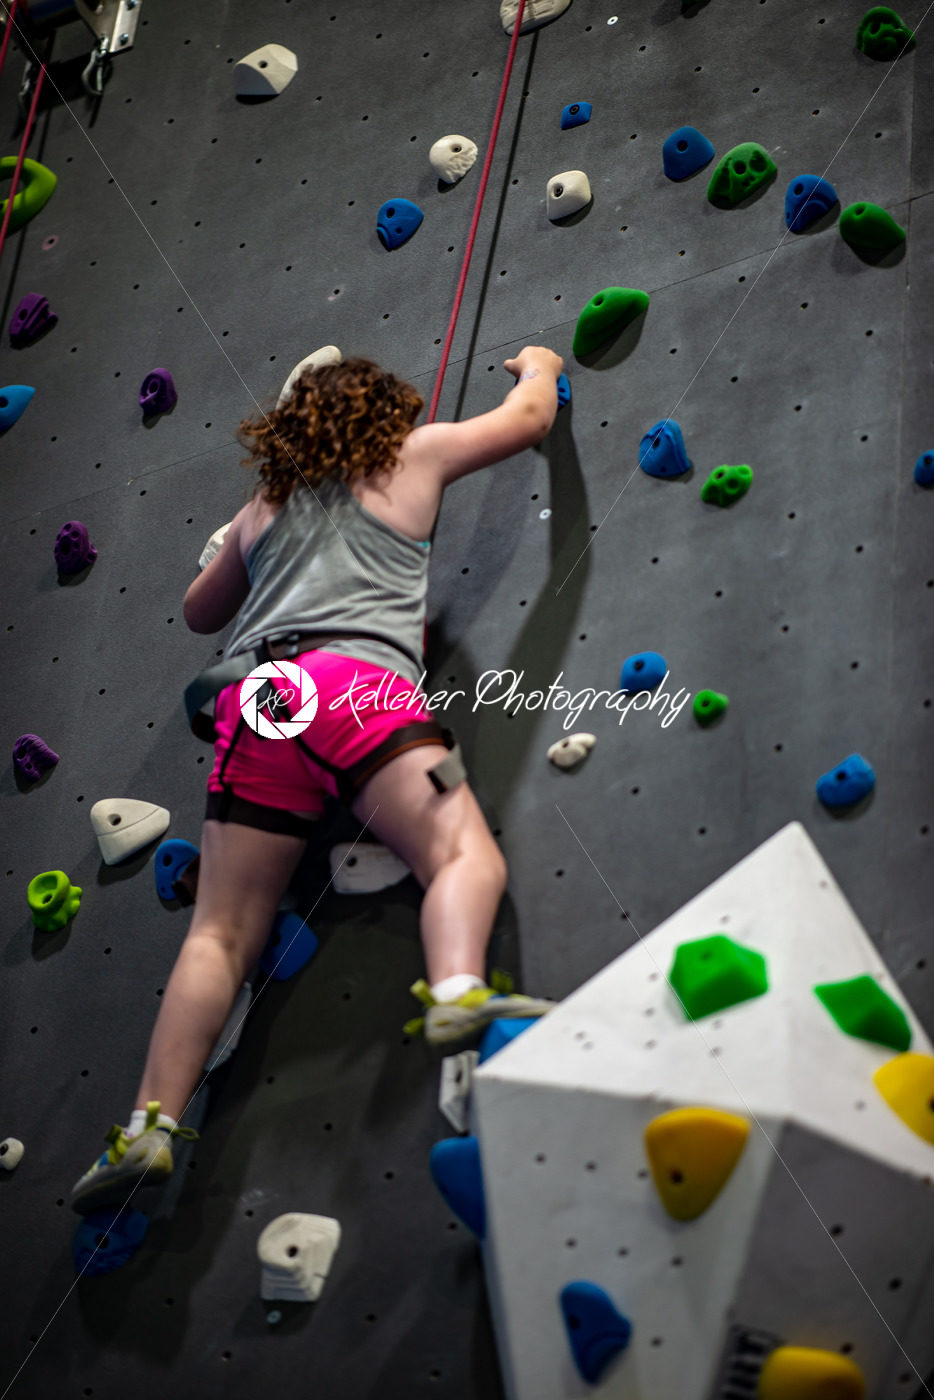 Young girl climbing up on practice wall in indoor rock gym - Kelleher Photography Store